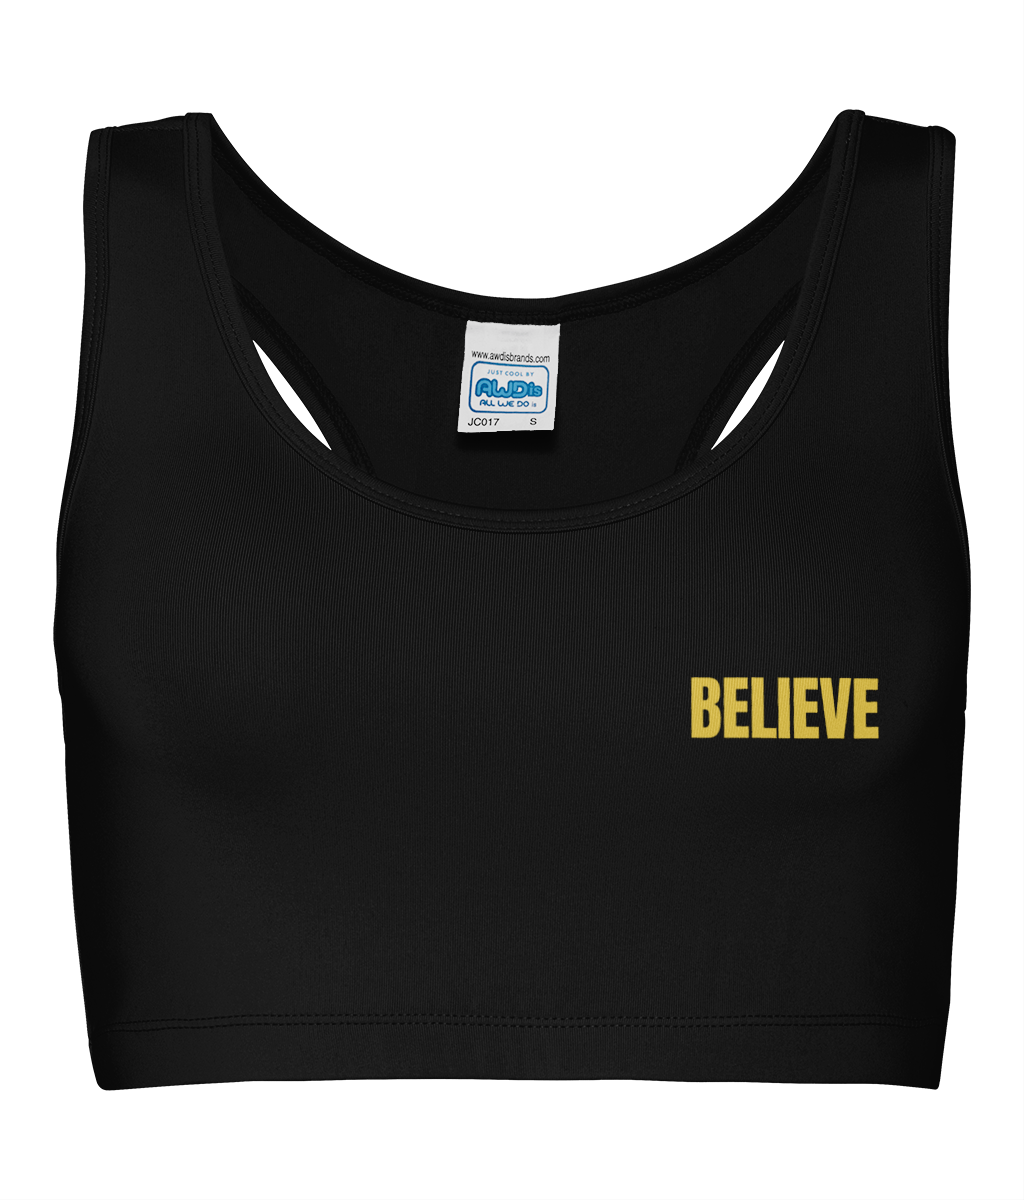 Women's Cool Sports Crop Top | AWDis Just Cool